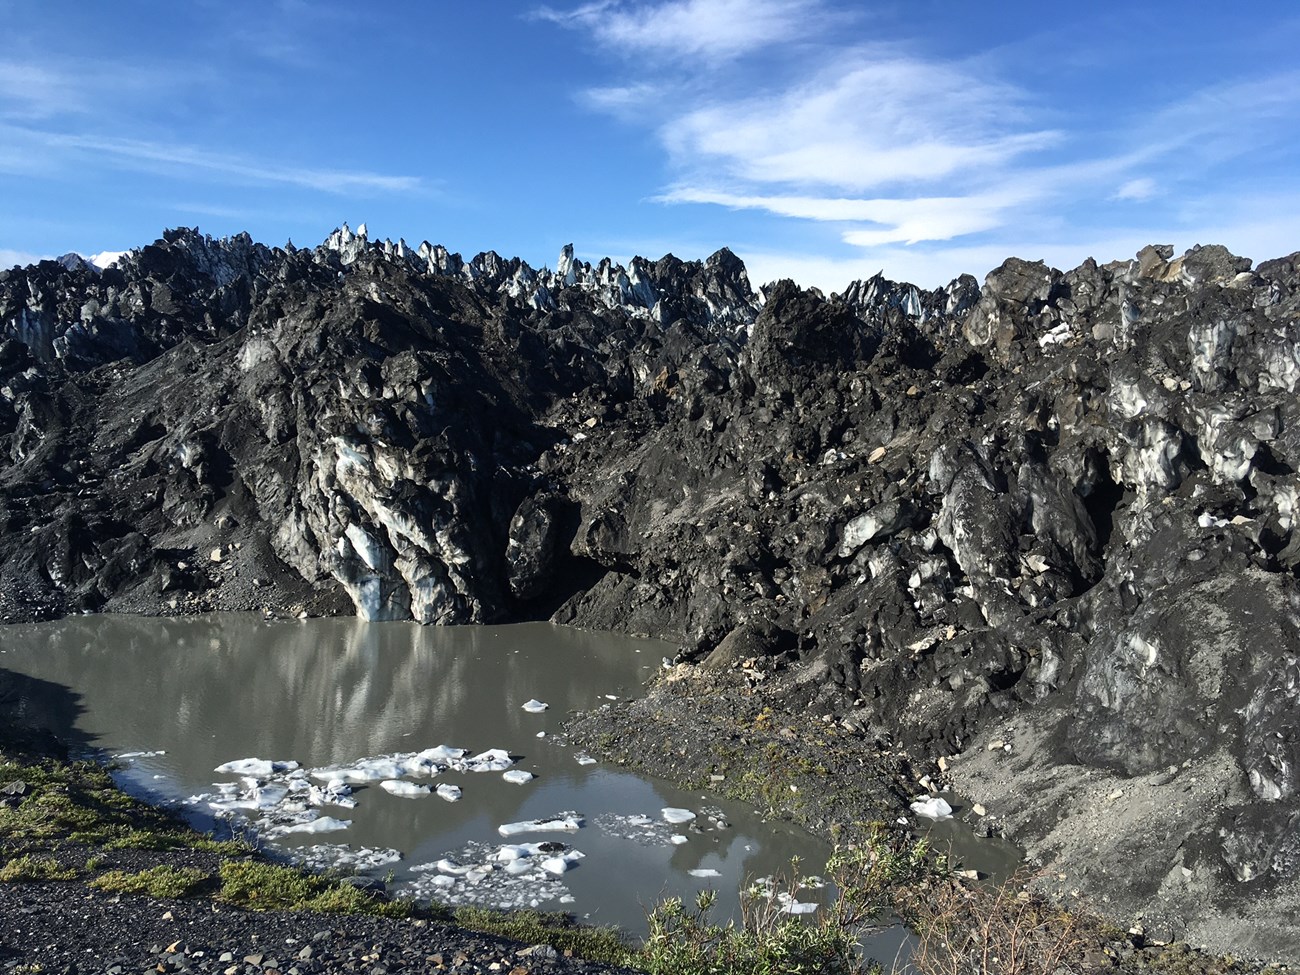 glacial debris, dirt-covered, jagged snow and ice with a pool of murky water nearby